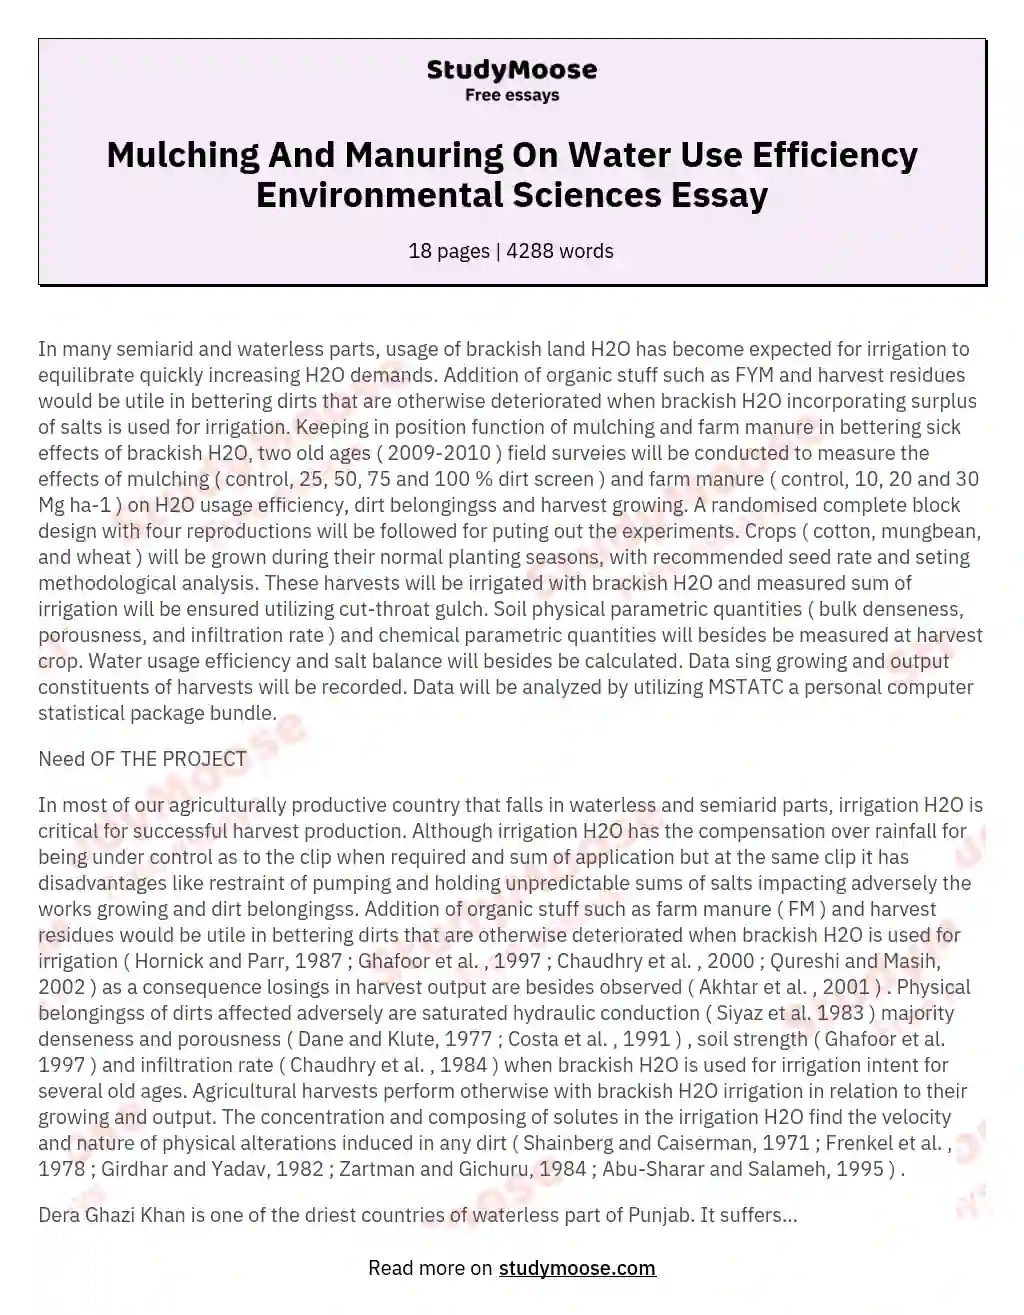 Mulching And Manuring On Water Use Efficiency Environmental Sciences Essay